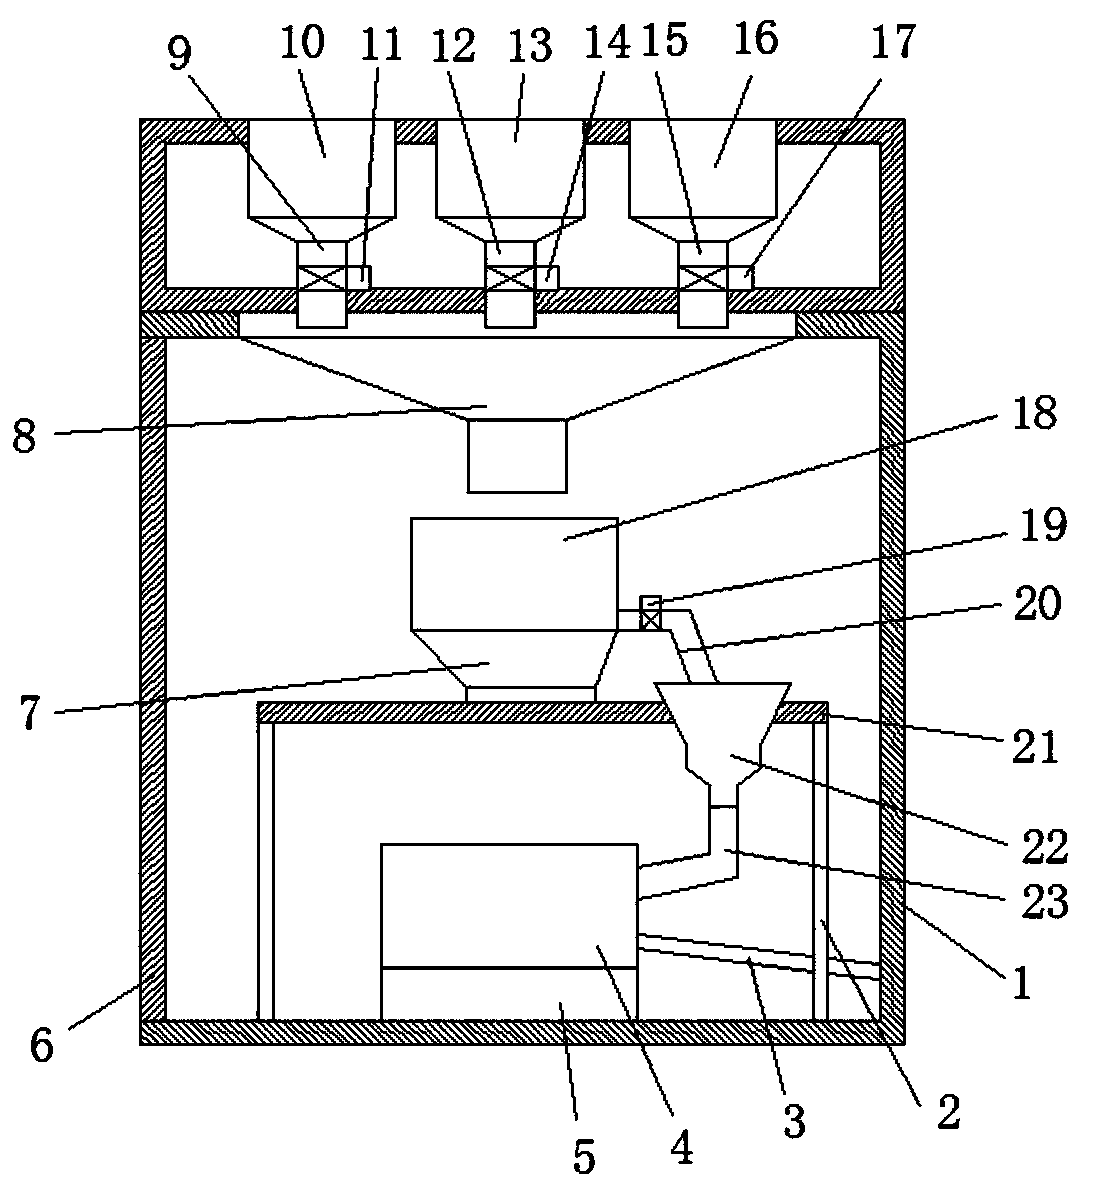 Preparation device for saline soil microbial repair agent